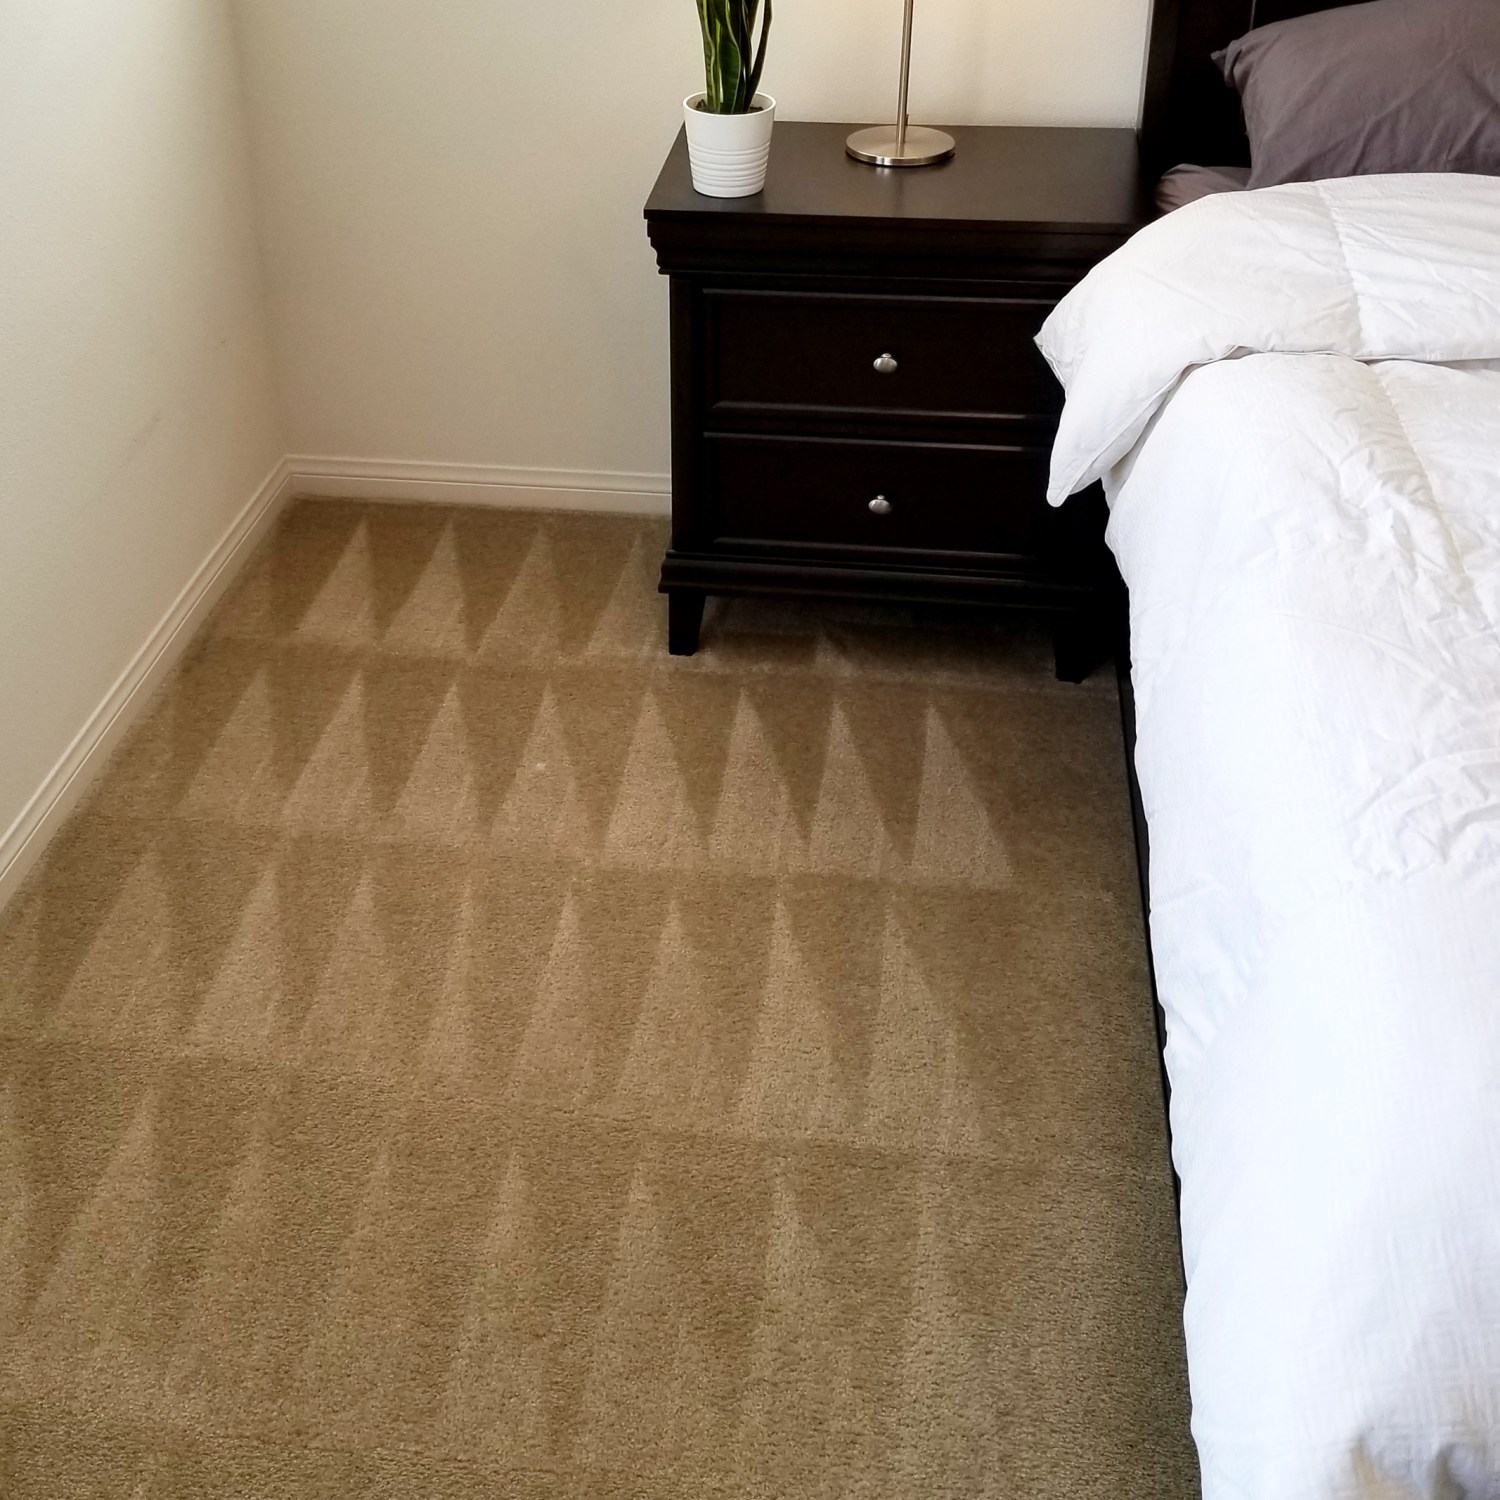 Brown carpet with perfect geometric-patterned vacuum lines